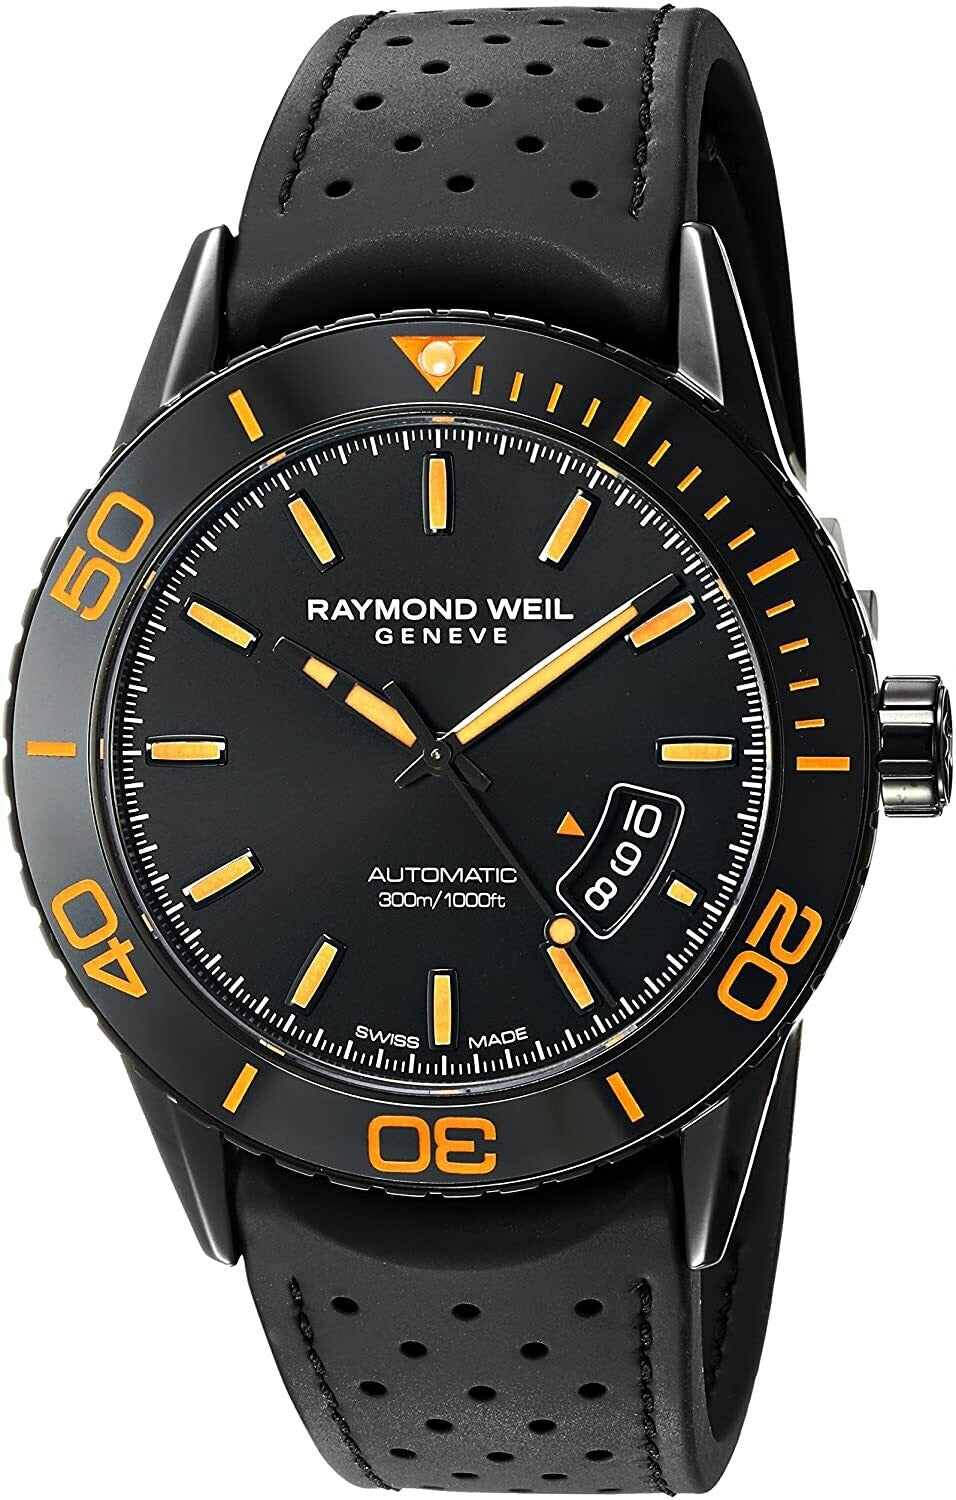 Pre-Owned Raymond Weil Freelancer Automatic Black Dial Men's Watch 2760-SB2-20001